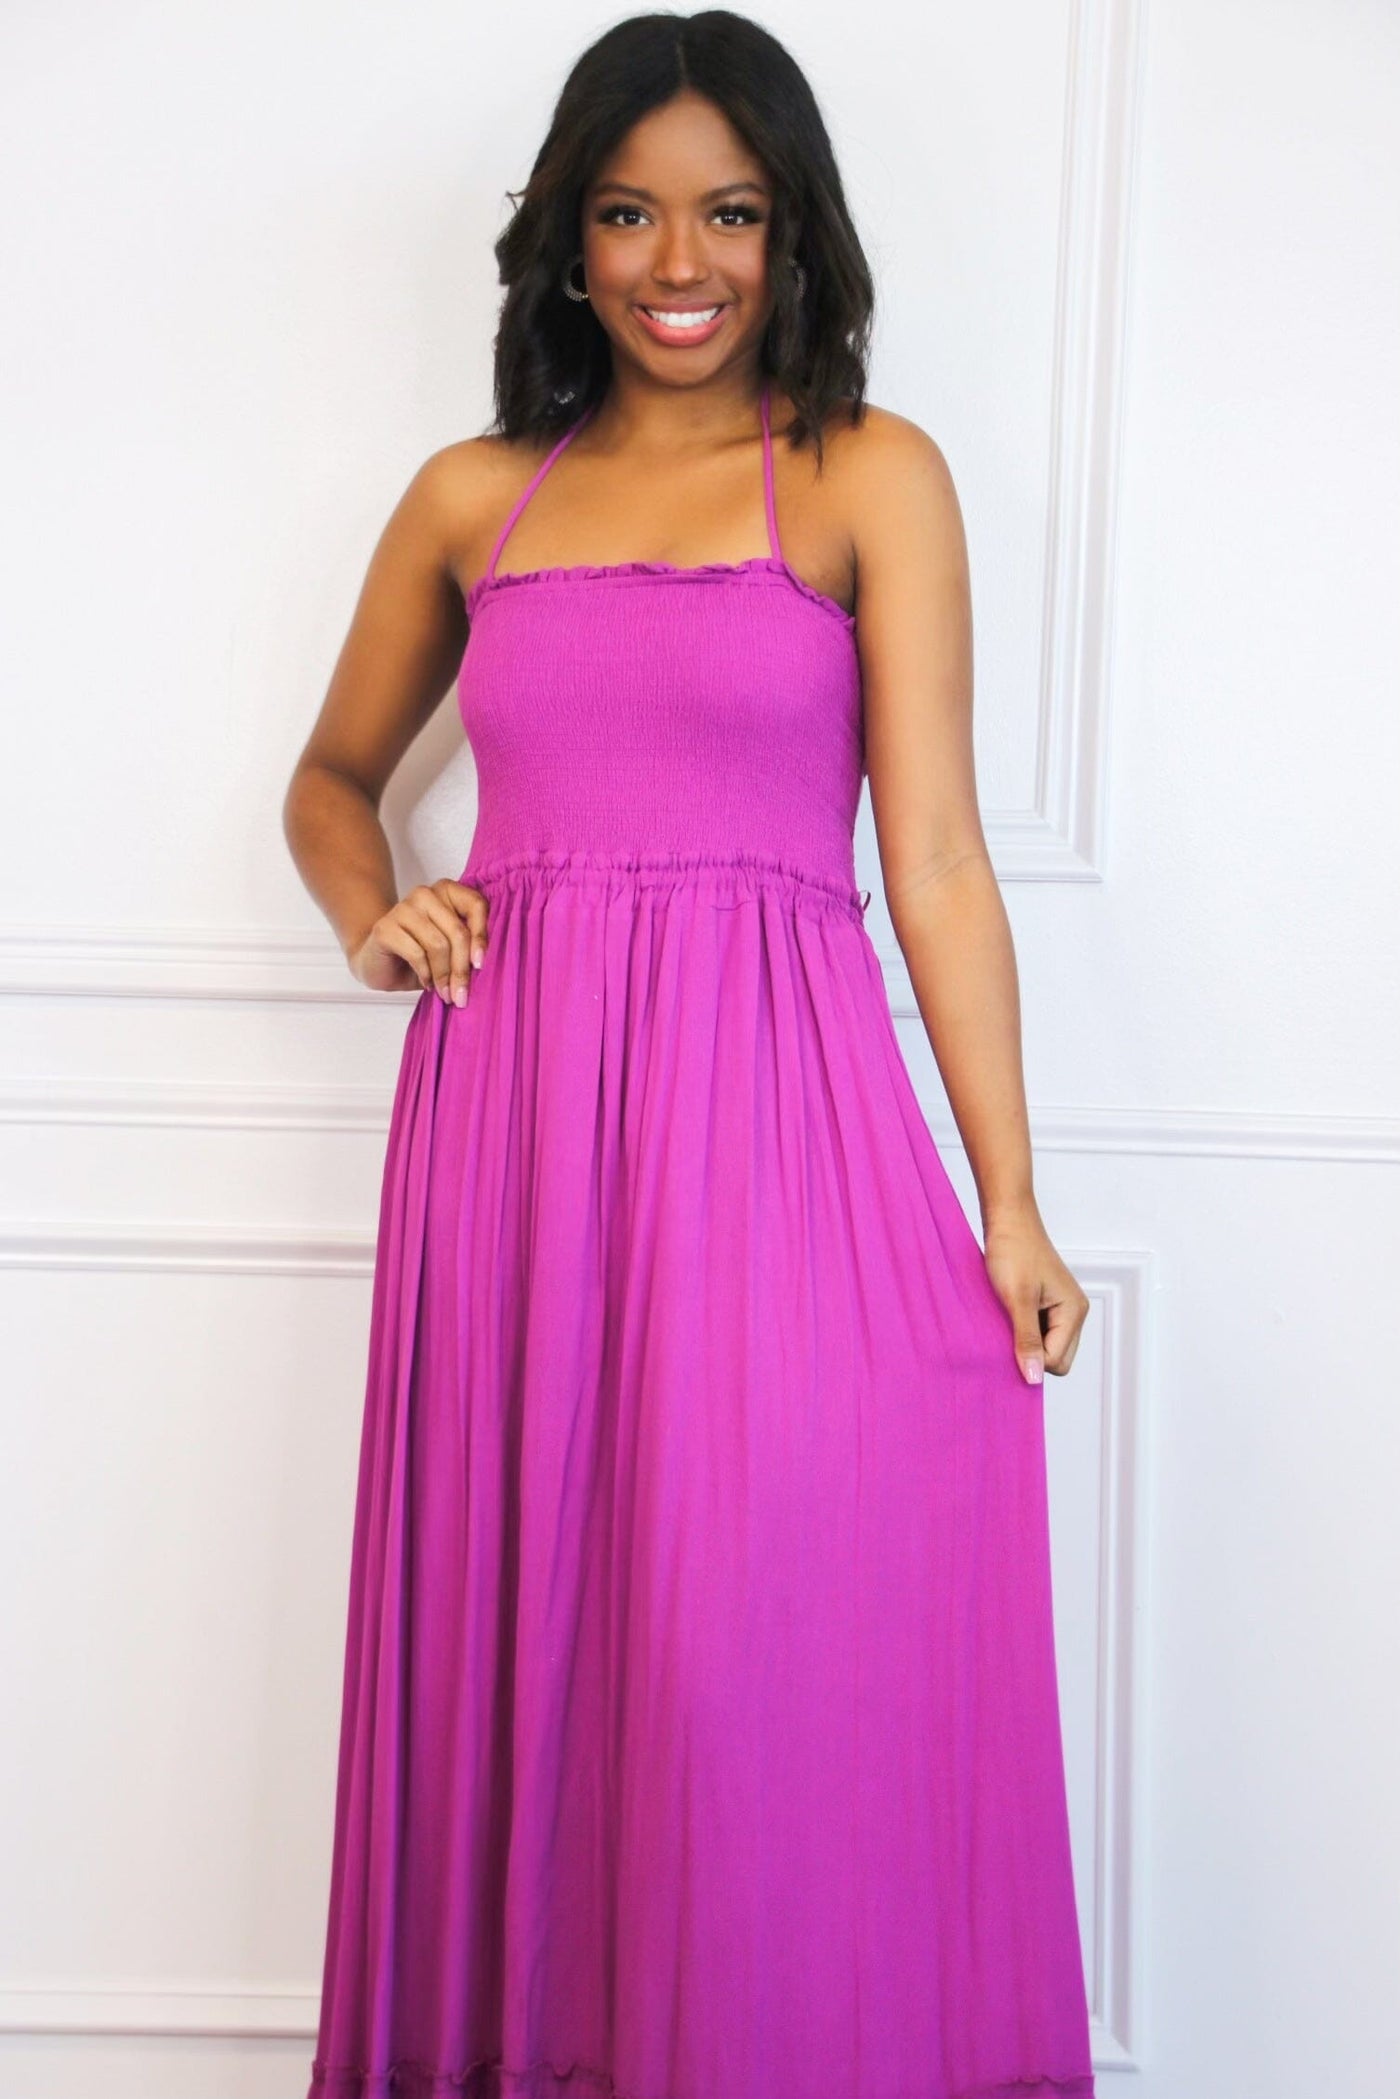 Chandler Smocked Open Back Maxi Dress: Orchid - Bella and Bloom Boutique